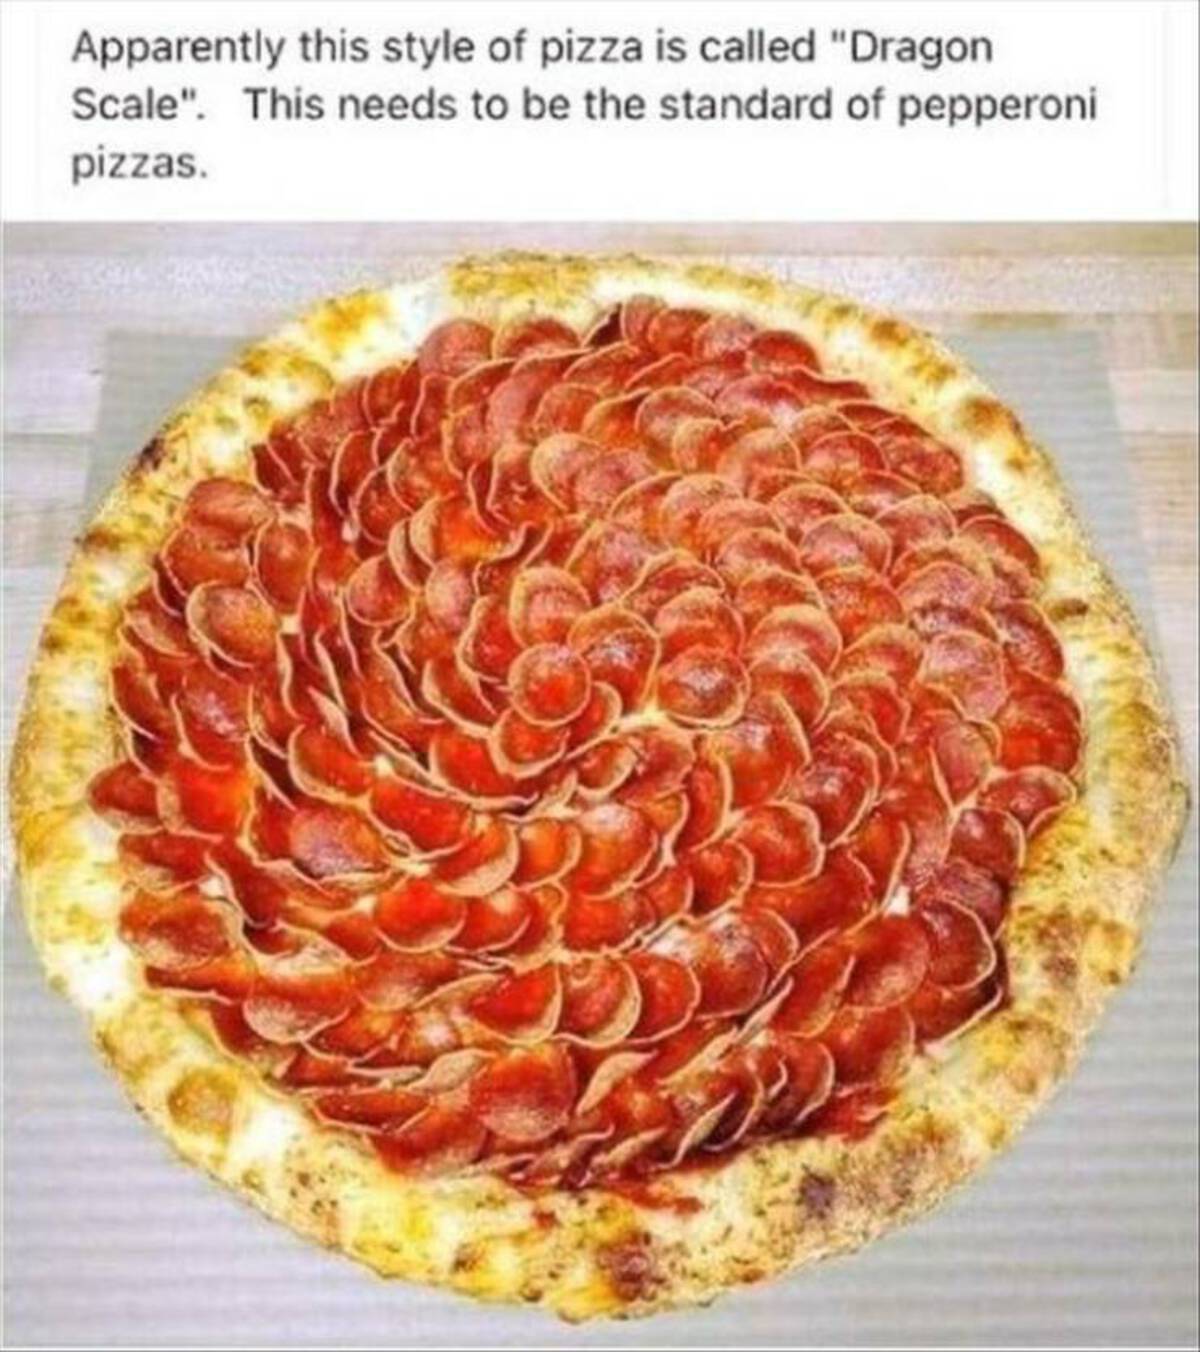 dragon scale pepperoni pizza - Apparently this style of pizza is called "Dragon Scale". This needs to be the standard of pepperoni pizzas.